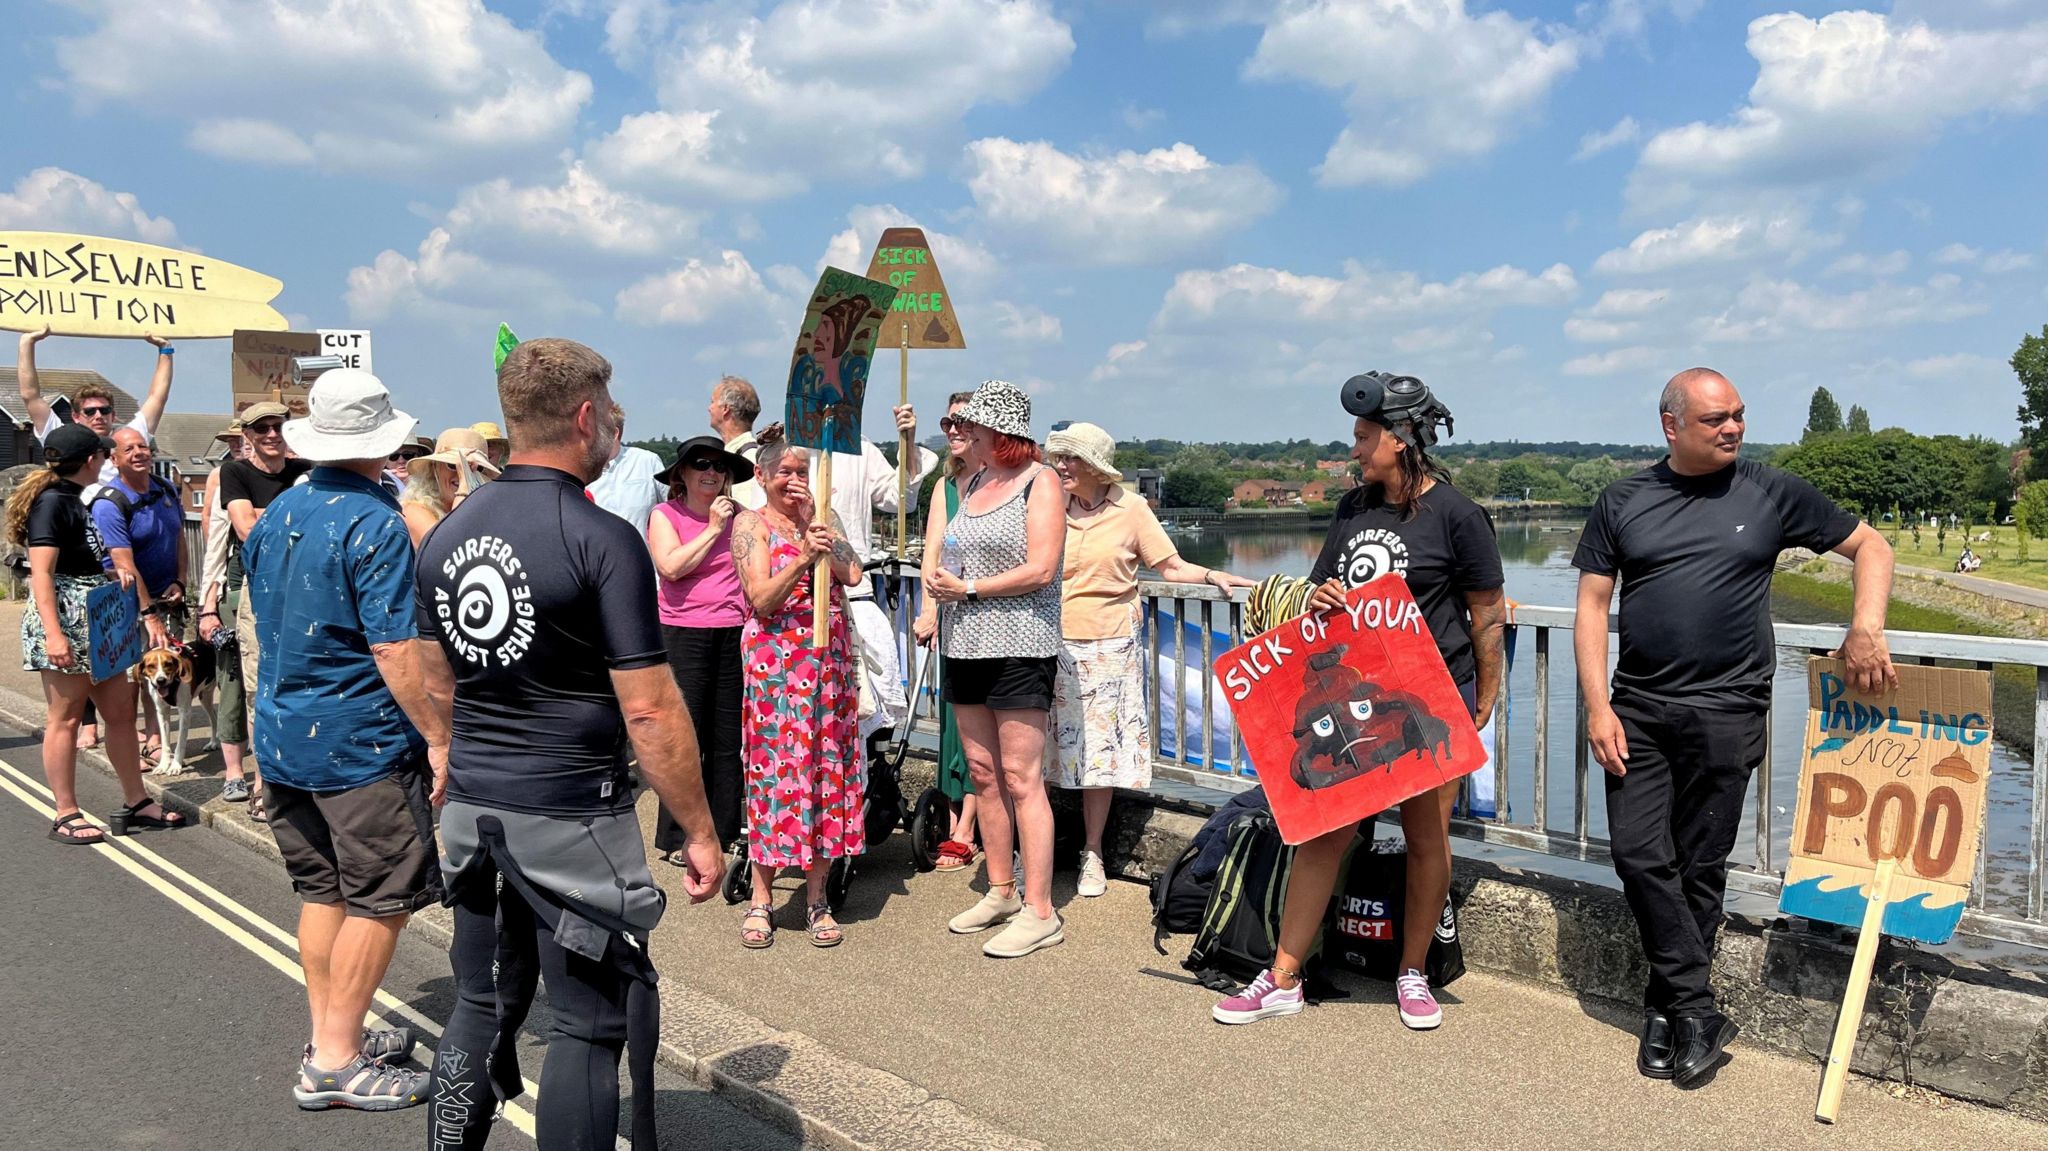 Campaigners with messages on card that say things like "sick of your poo" and they are stood on a bridge over the river itchen for the protest